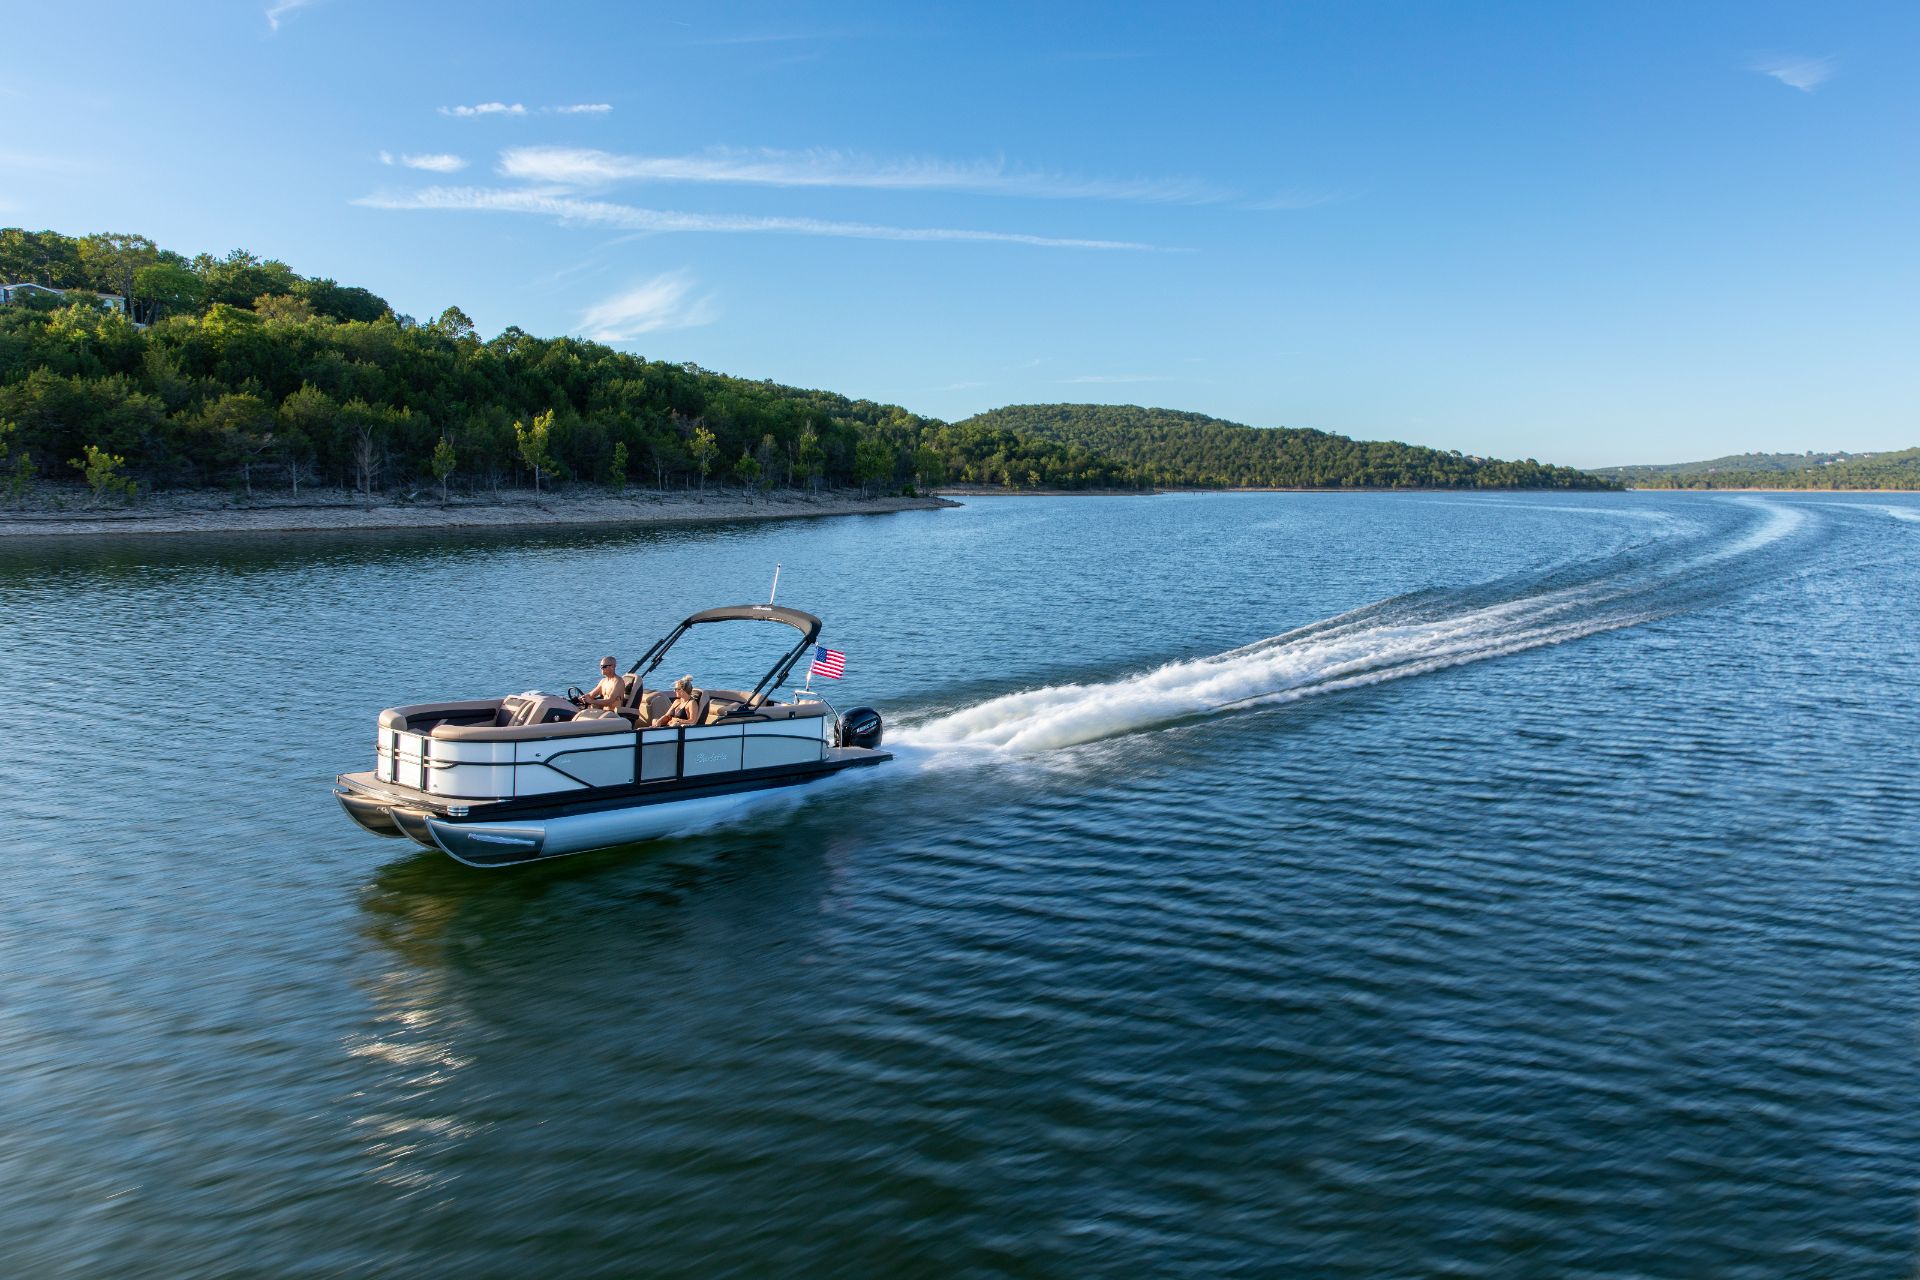 How to Become a Boater (4 Simple Steps)